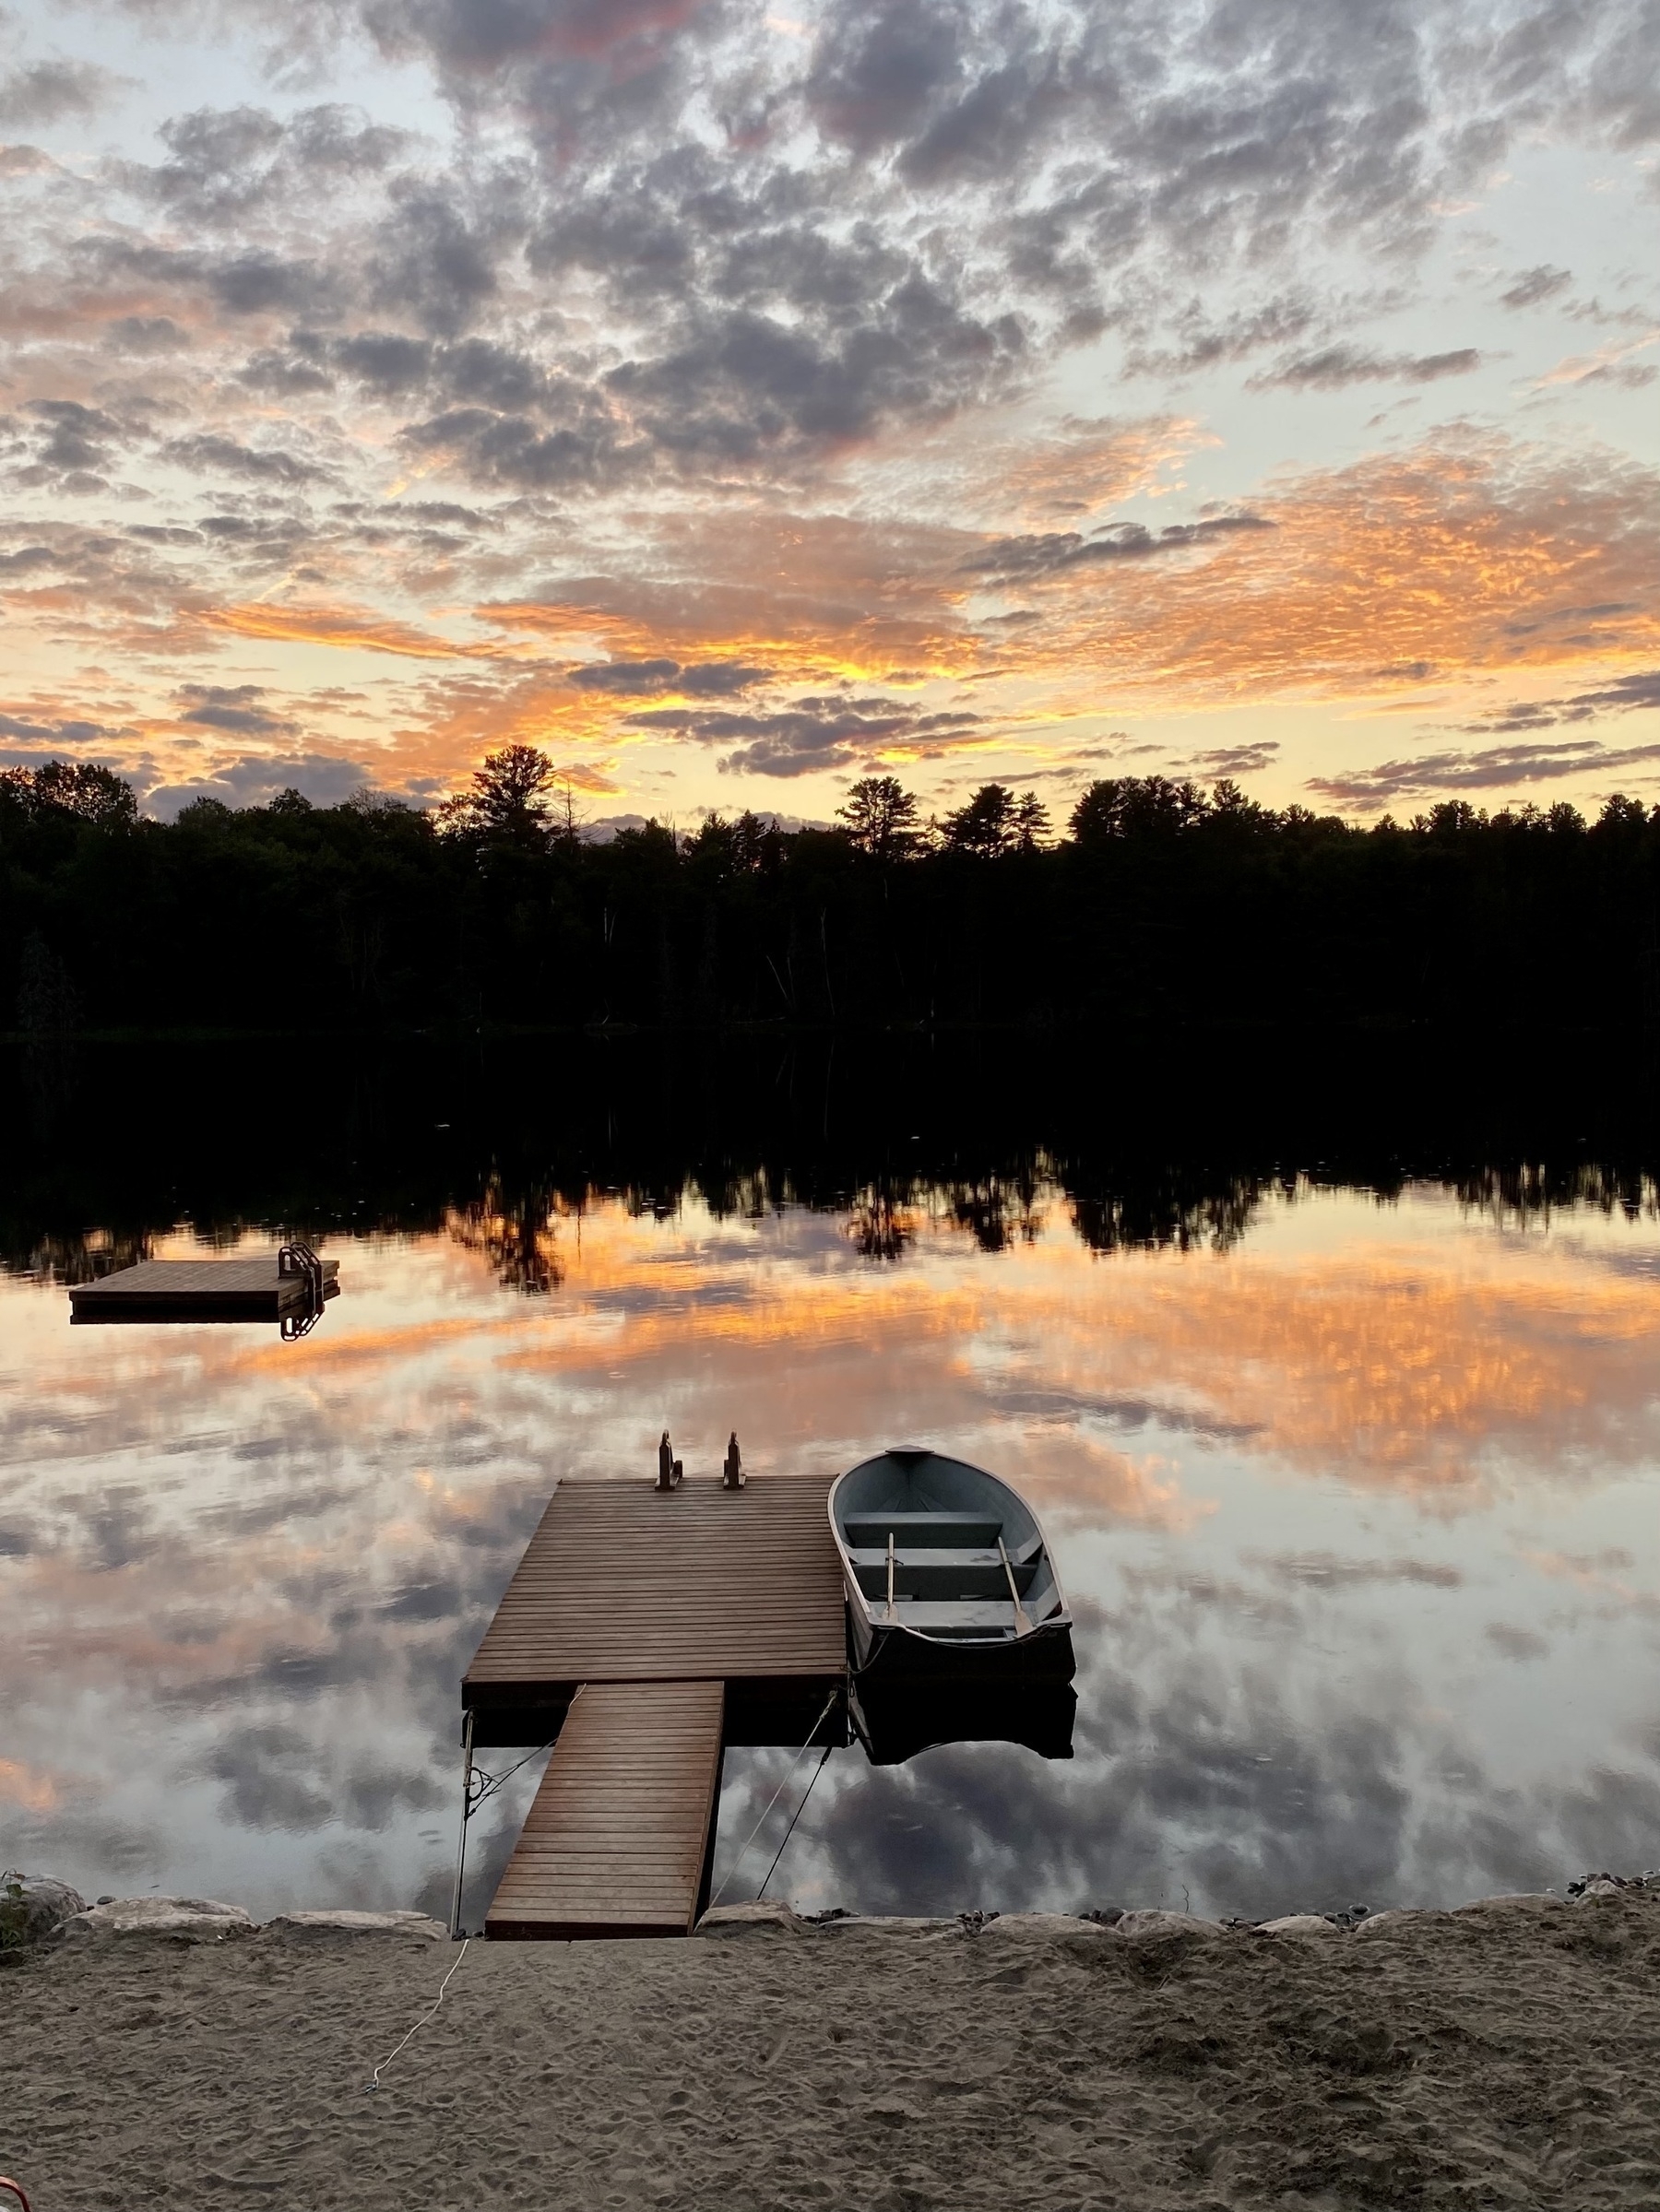 A boat docked on a serene lake reflects the cloudy sunset sky, surrounded by tranquil trees and a sandy shore.